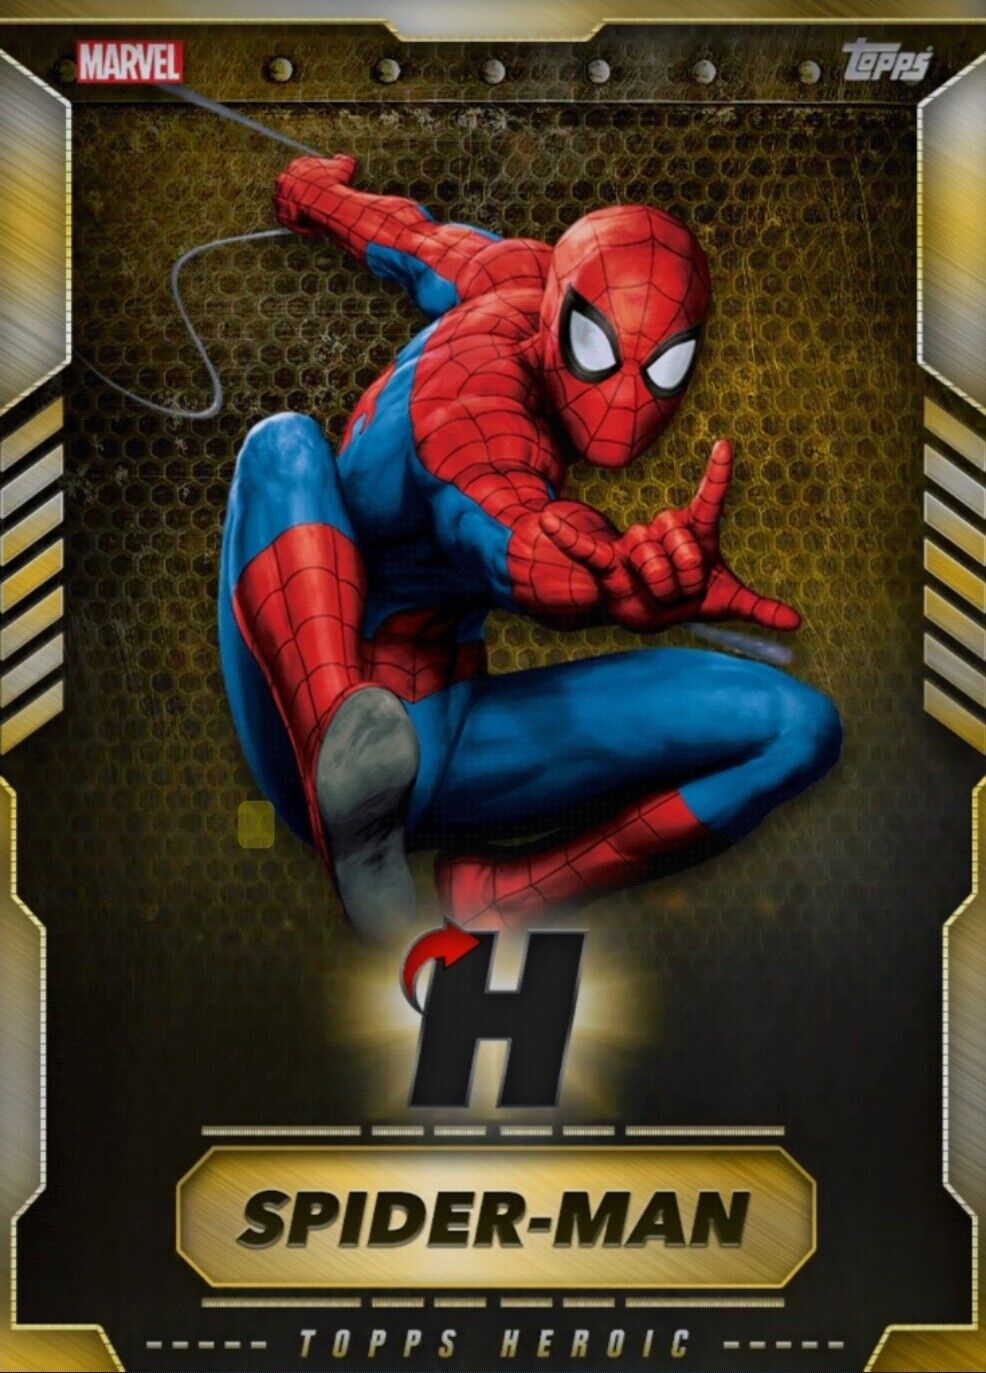 Topps Marvel Collect 8 CC July 2019 Topps Heroic Gold VIP Spider-Man